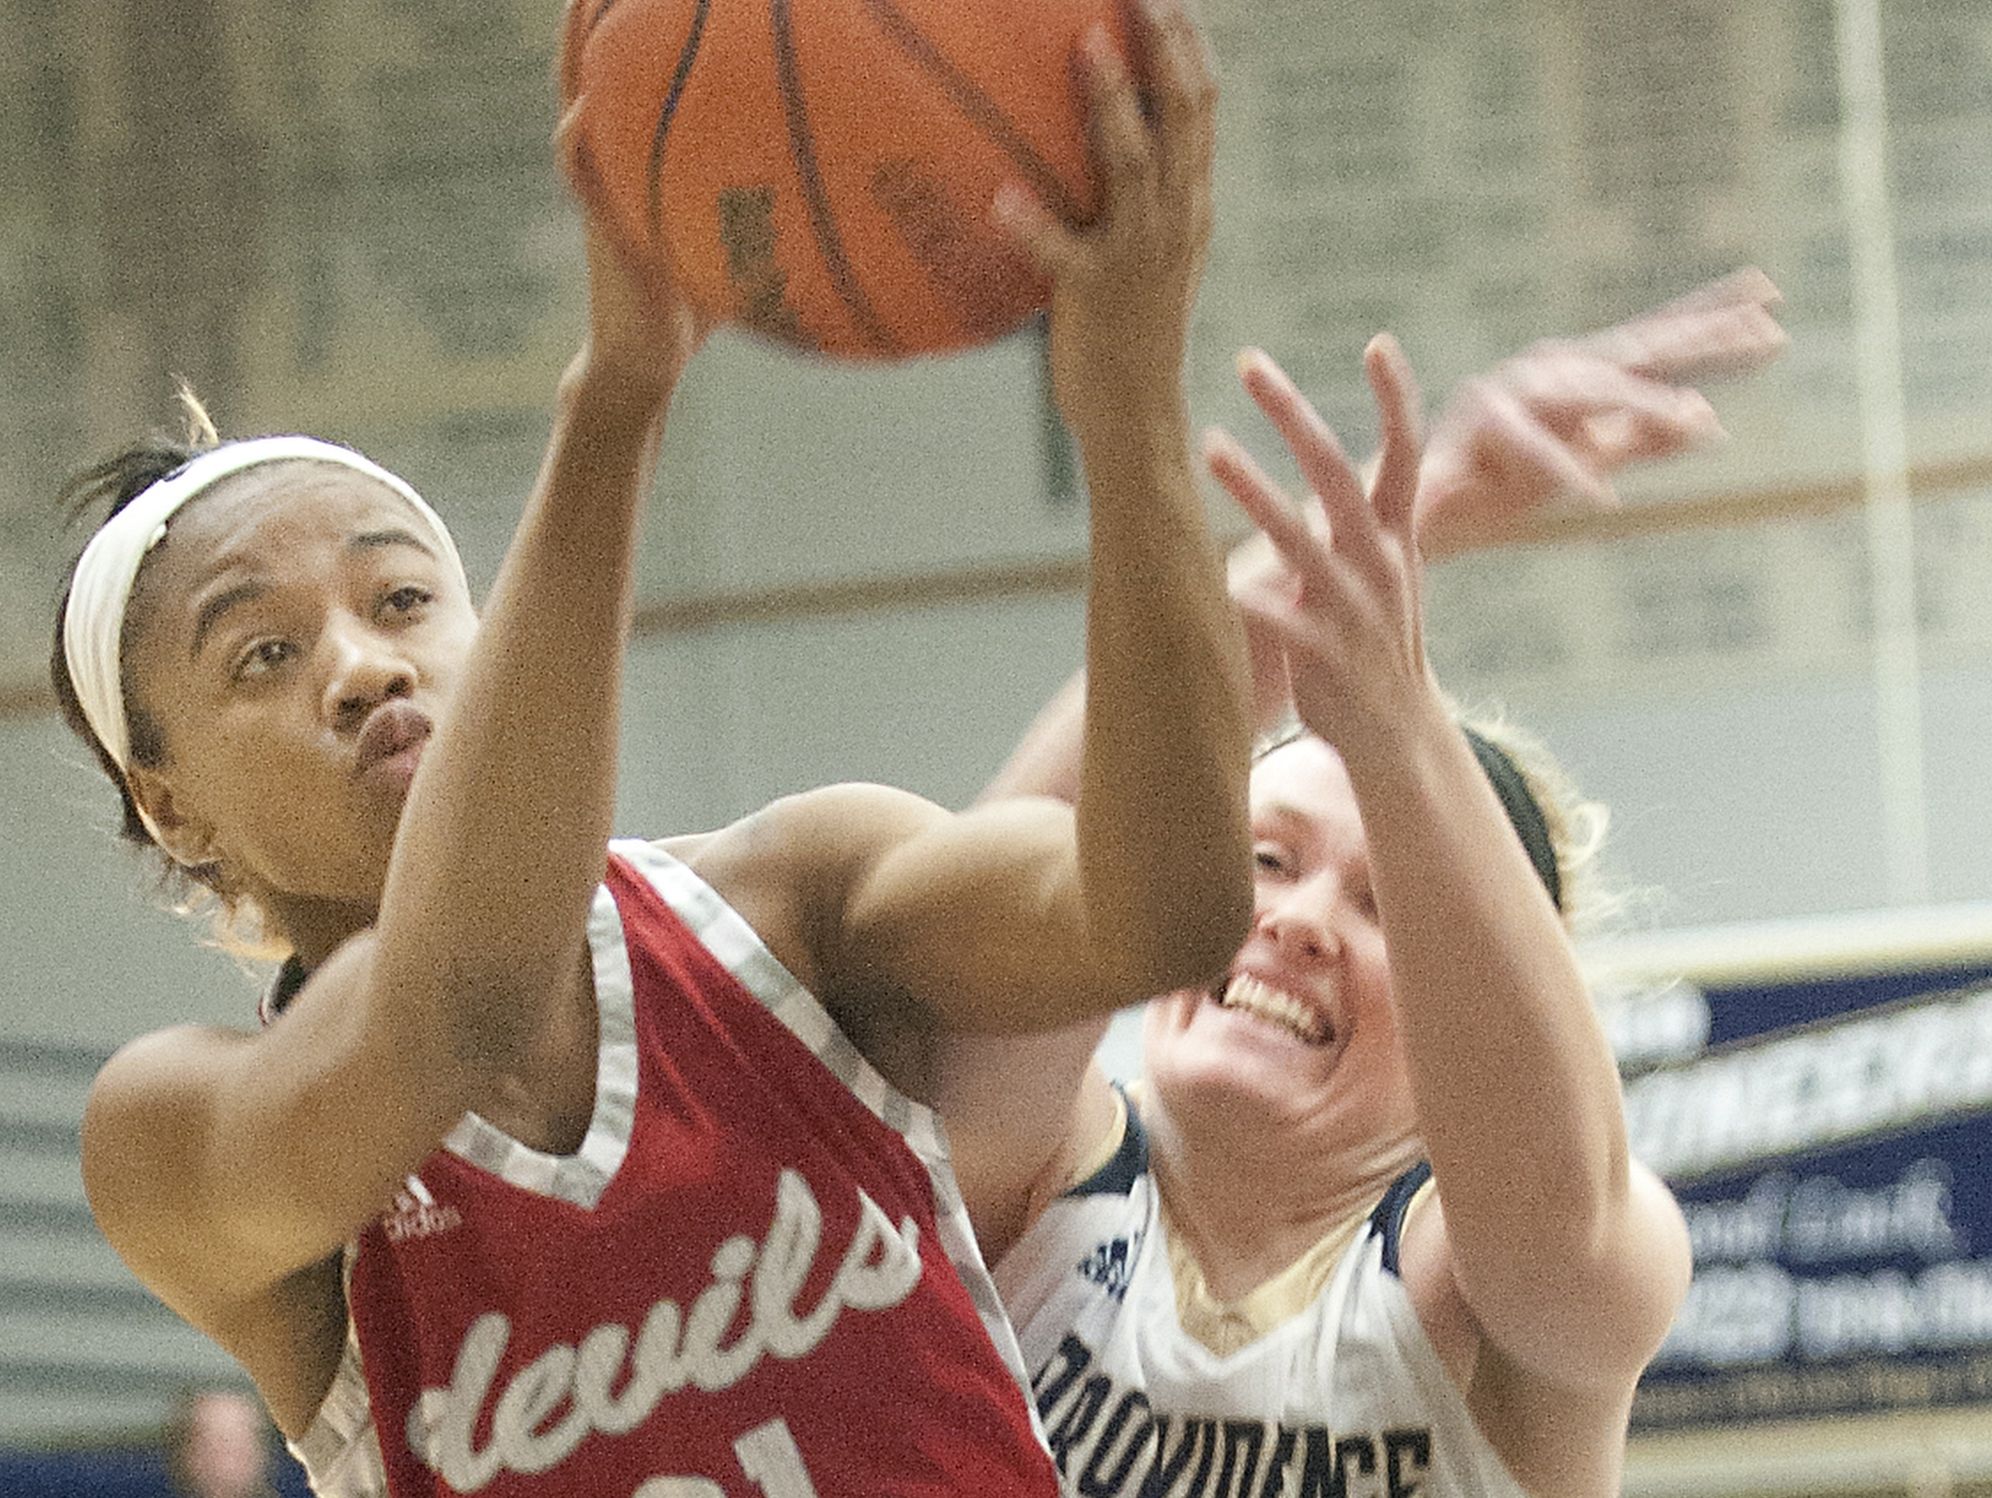 Jeffersonville guard Jhala Henry puts up a shot as Providence forward Claire Rauck defends the basket. 03 January 2017